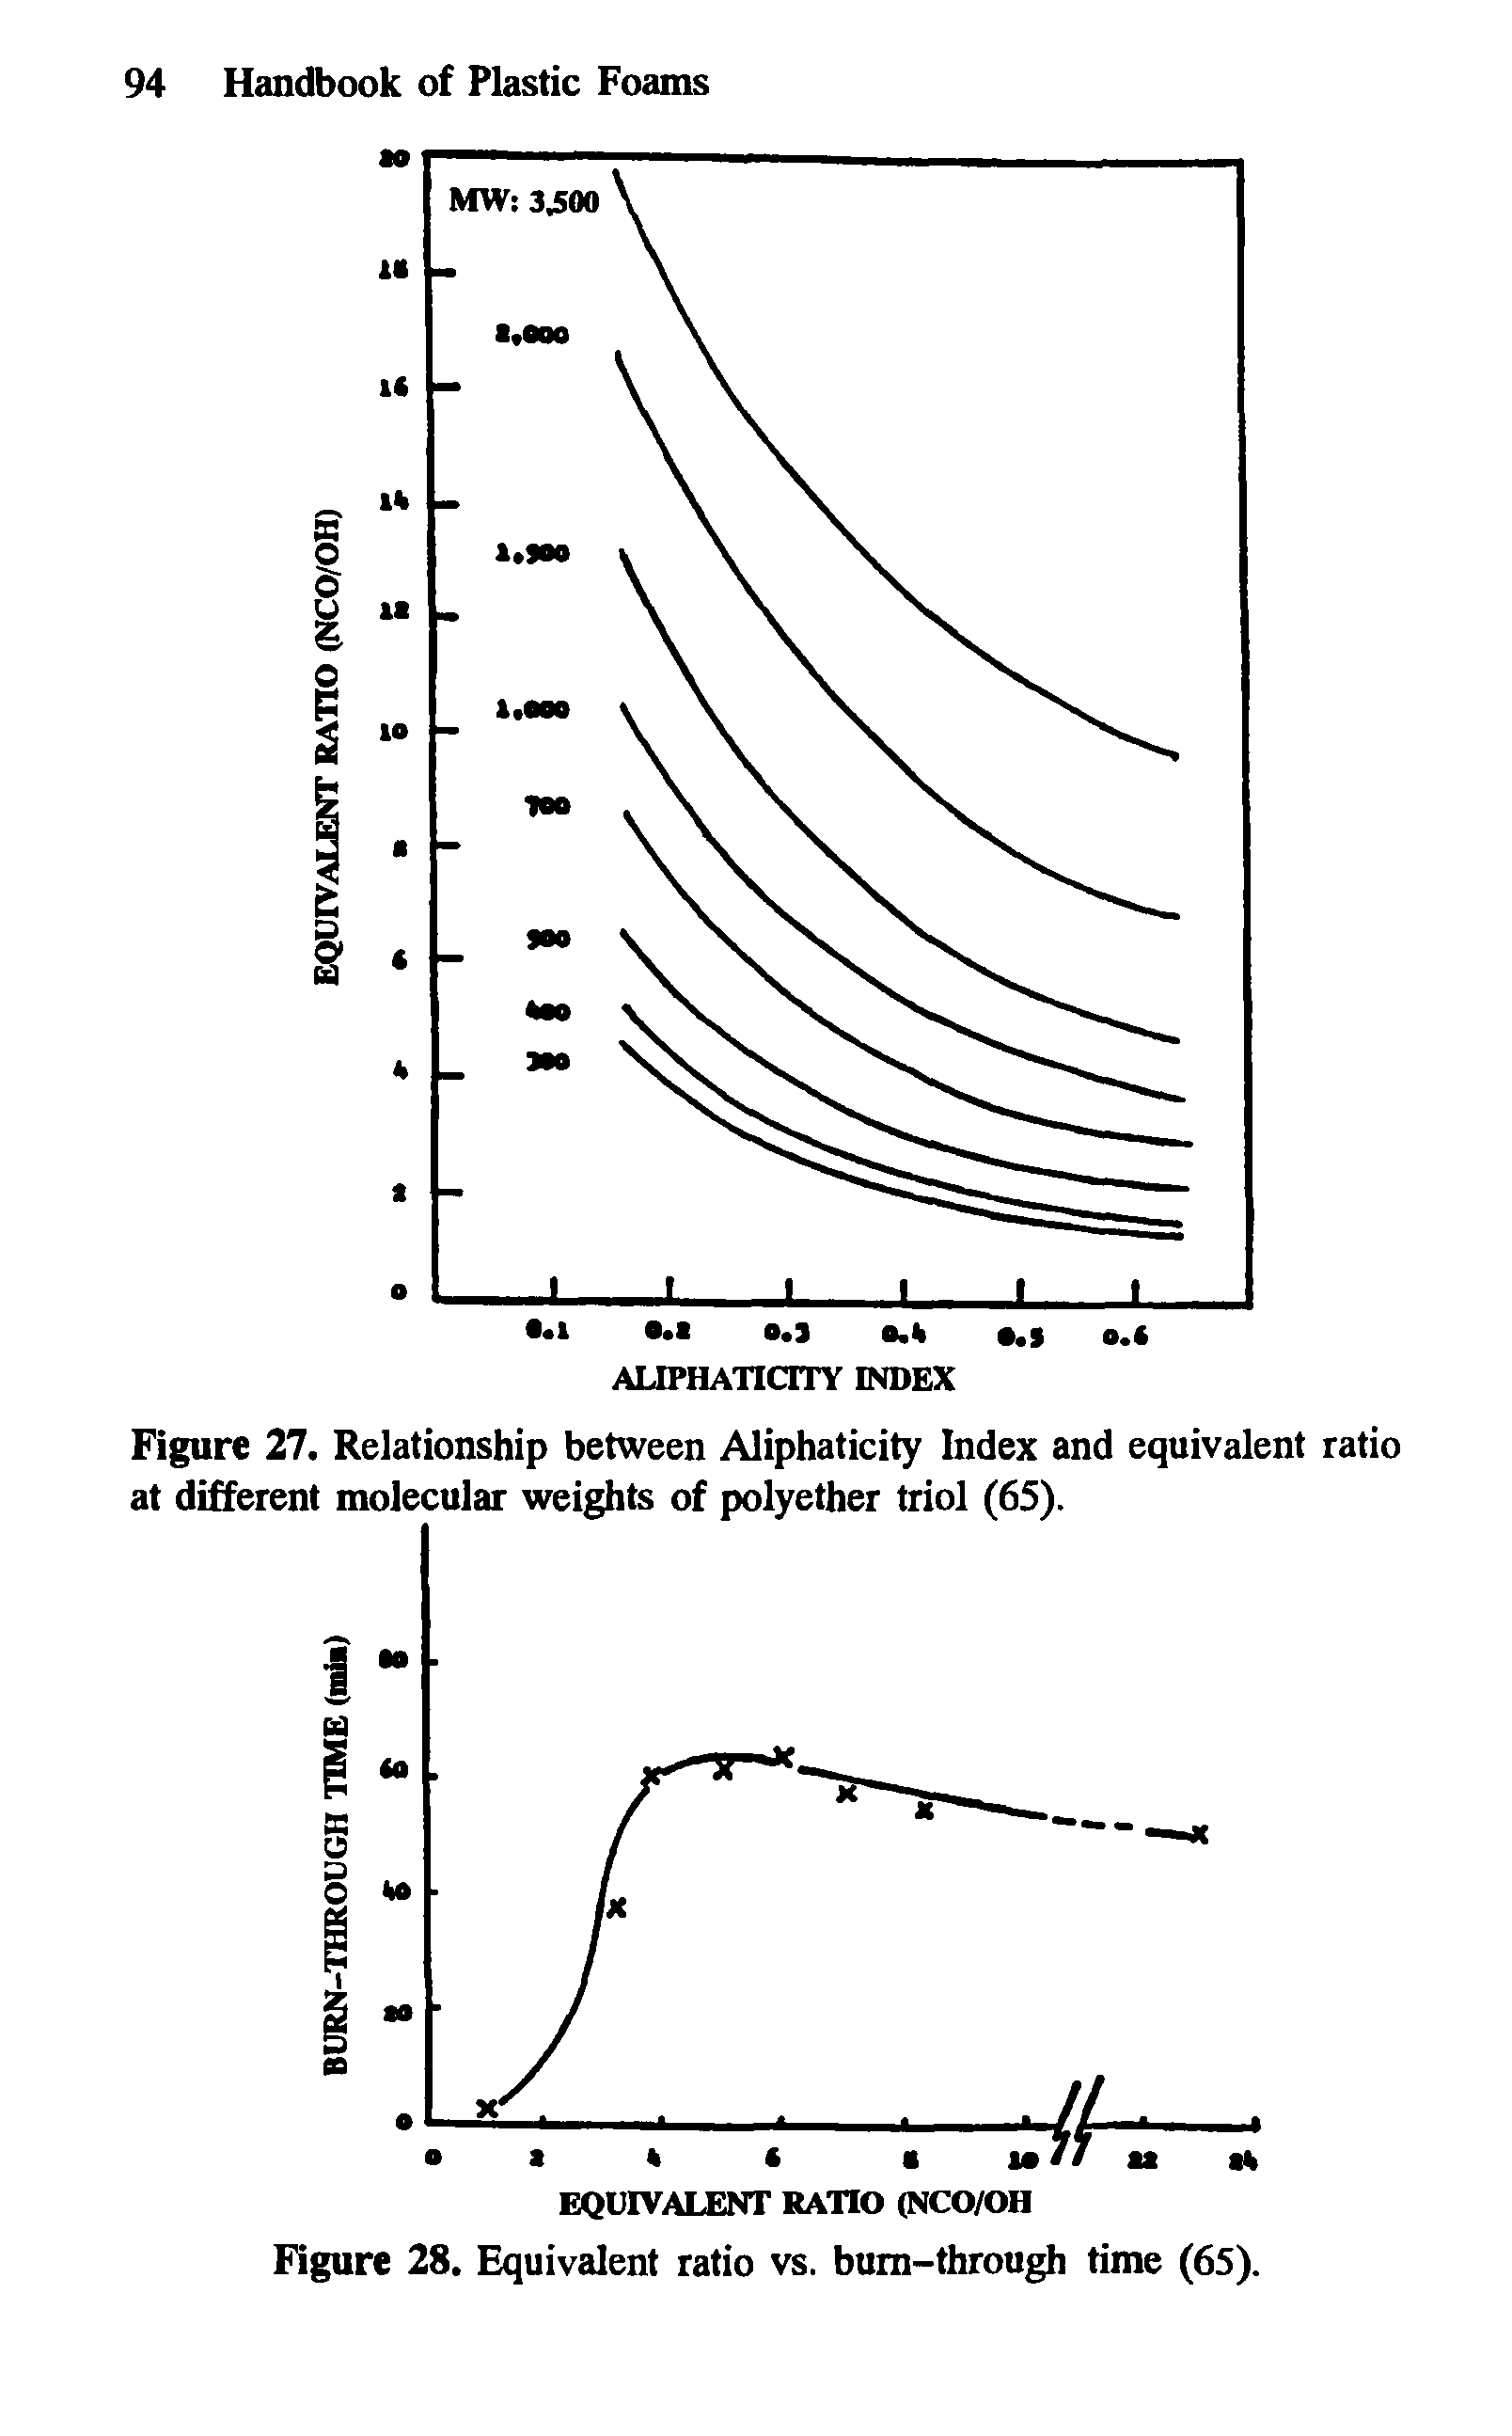 Figure 27. Relationship between Aliphaticity Index and equivalent ratio at different molecular weights of polyether triol (65).